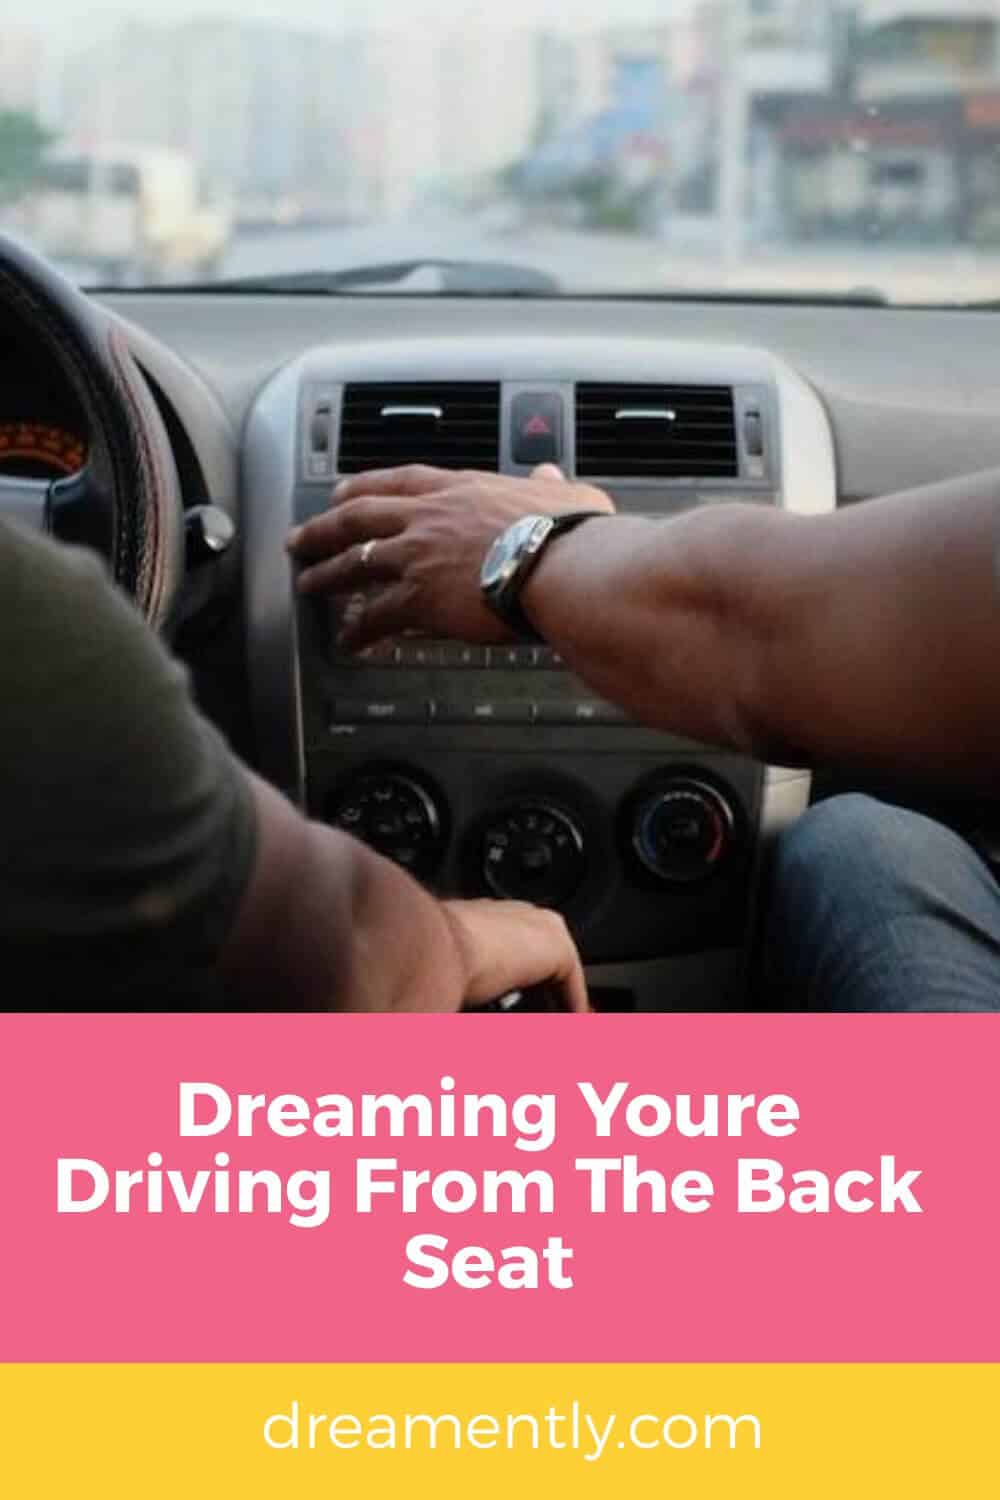 Dreaming Youre Driving From The Back Seat (2)